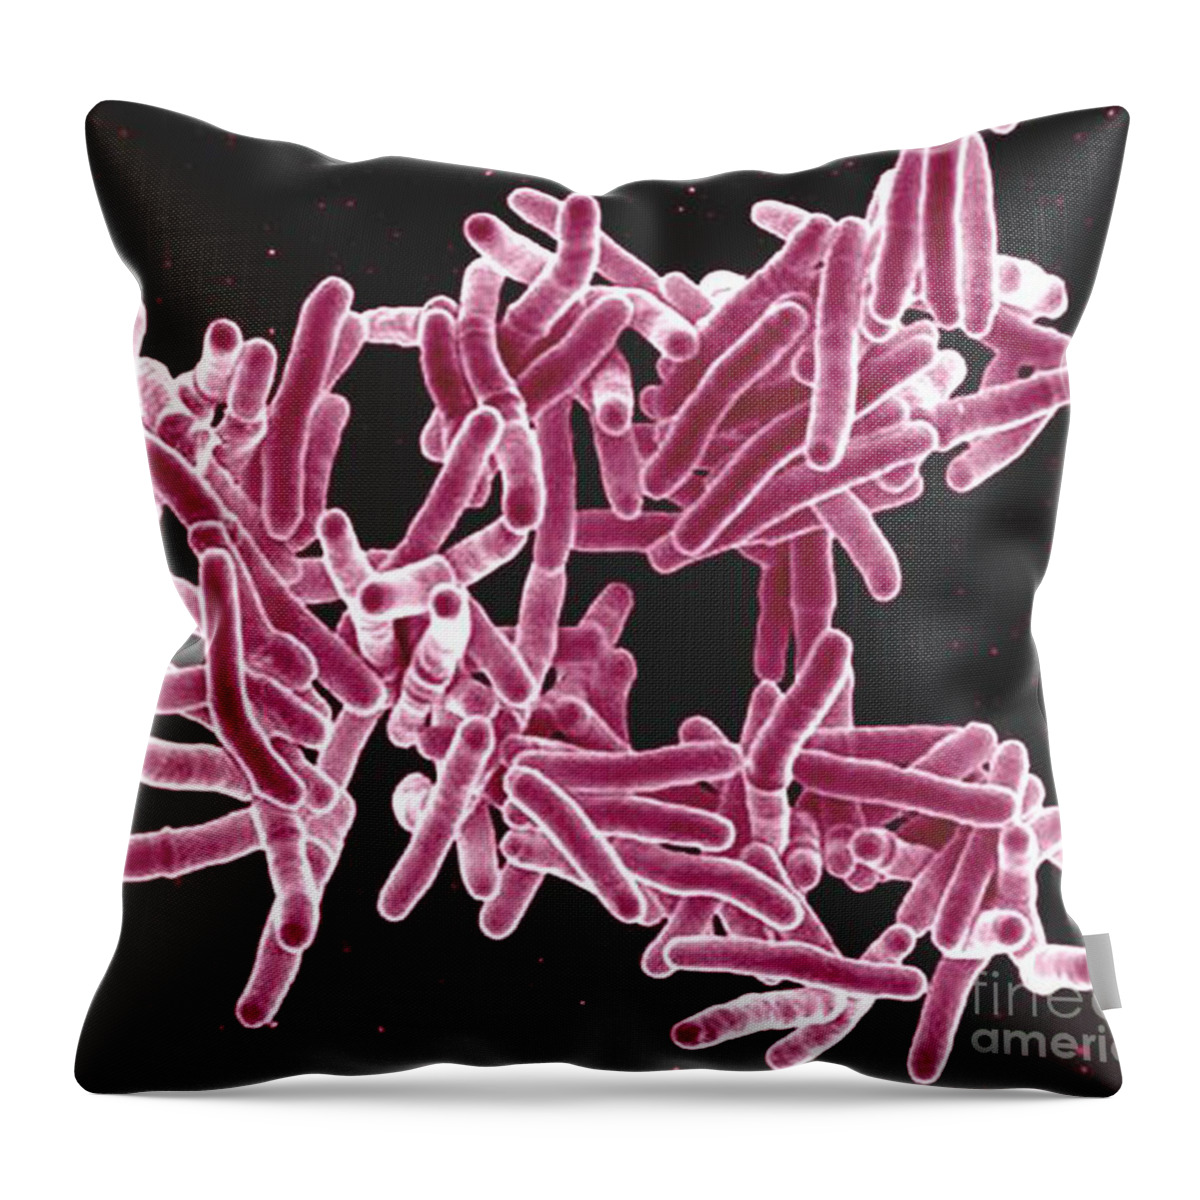 Microbiology Throw Pillow featuring the photograph Mycobacterium Tuberculosis Bacteria, Sem #2 by Science Source